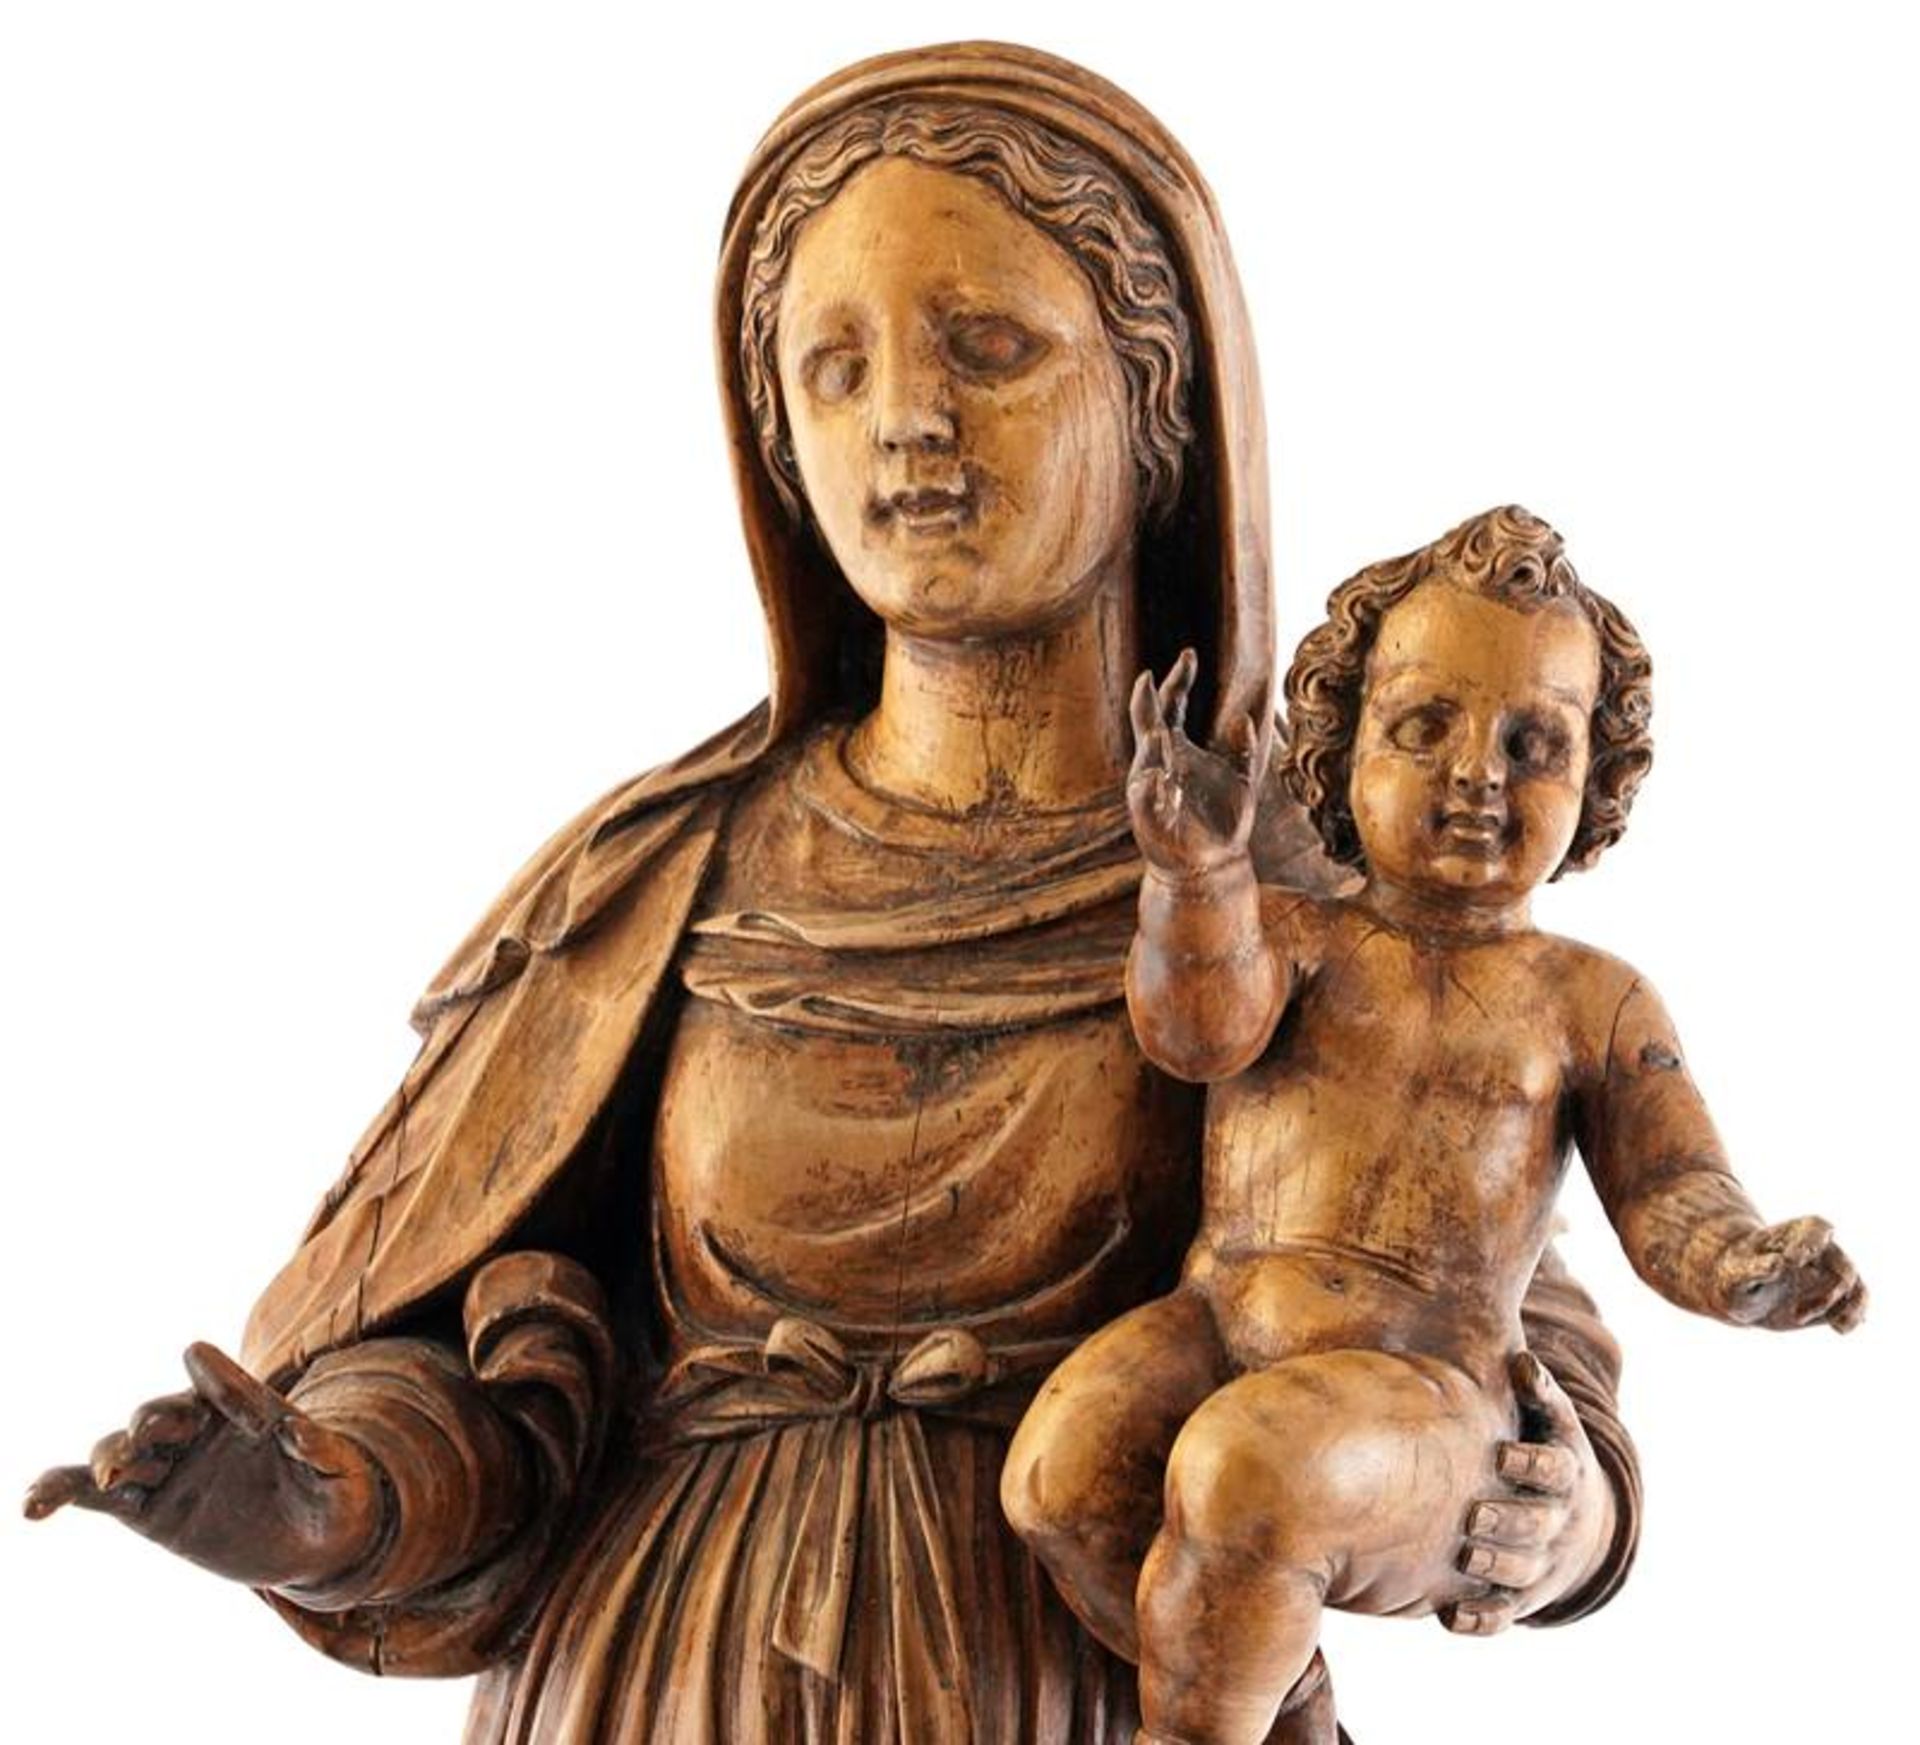 Mary with child - Image 5 of 6